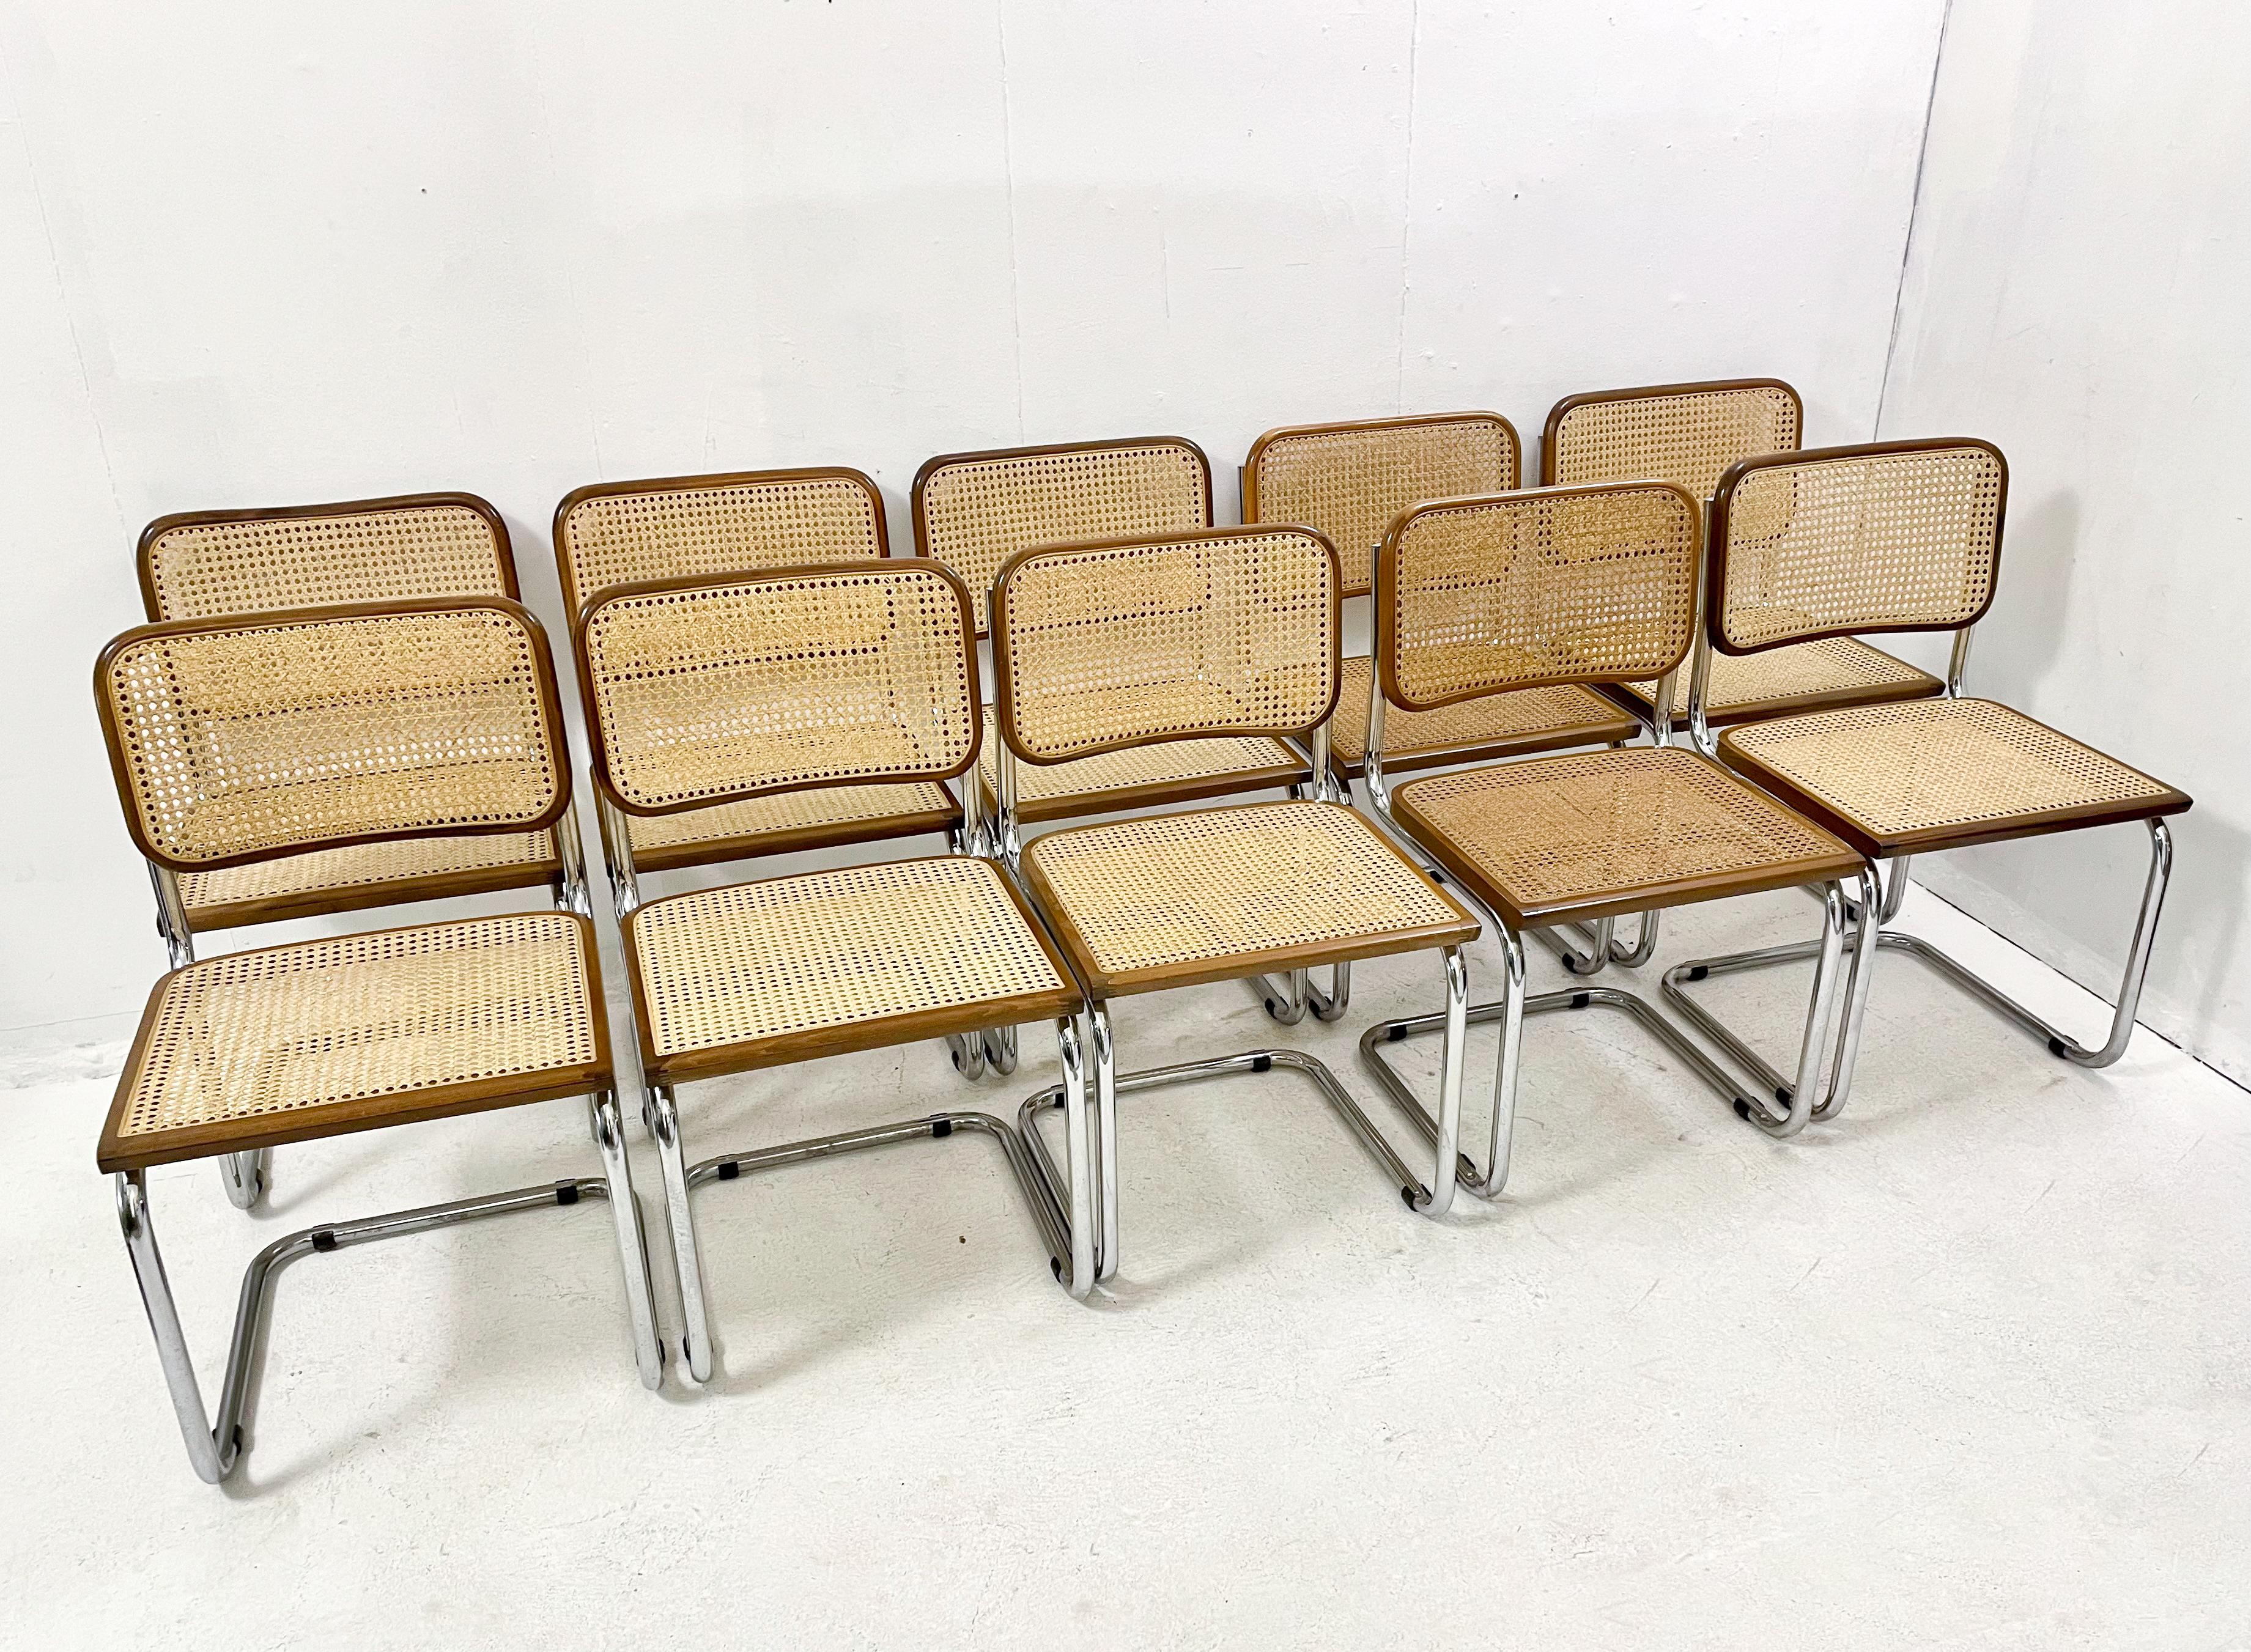 Set of 10 chairs, Marcel Breuer Style, Wood and Canework Italy, 1995.